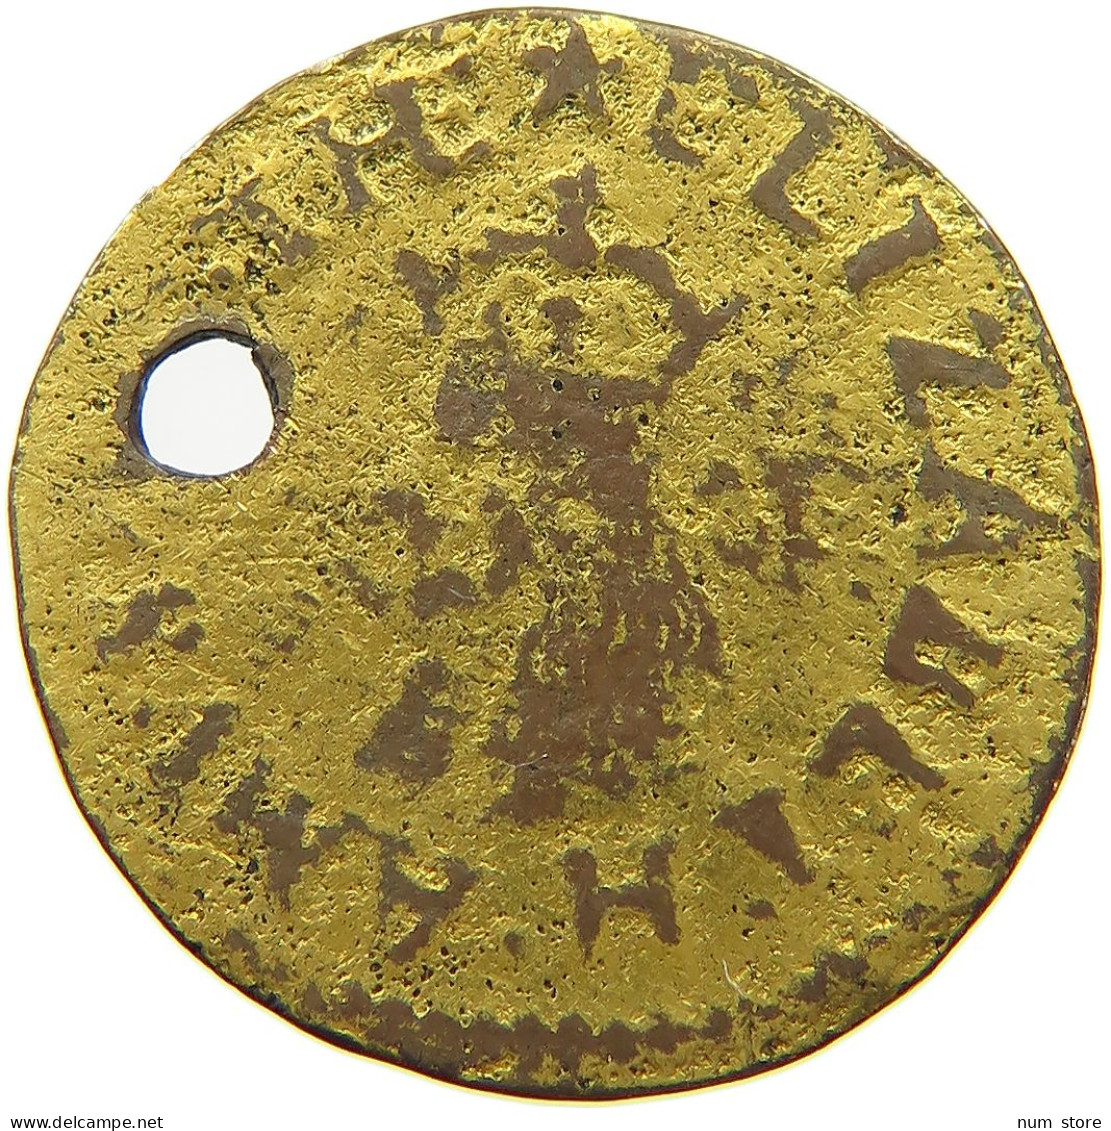 GREAT BRITAIN HALFPENNY 1667 EPSOM Charles II (1660-1685) GOLD PLATED #a021 0359 - B. 1/2 Penny